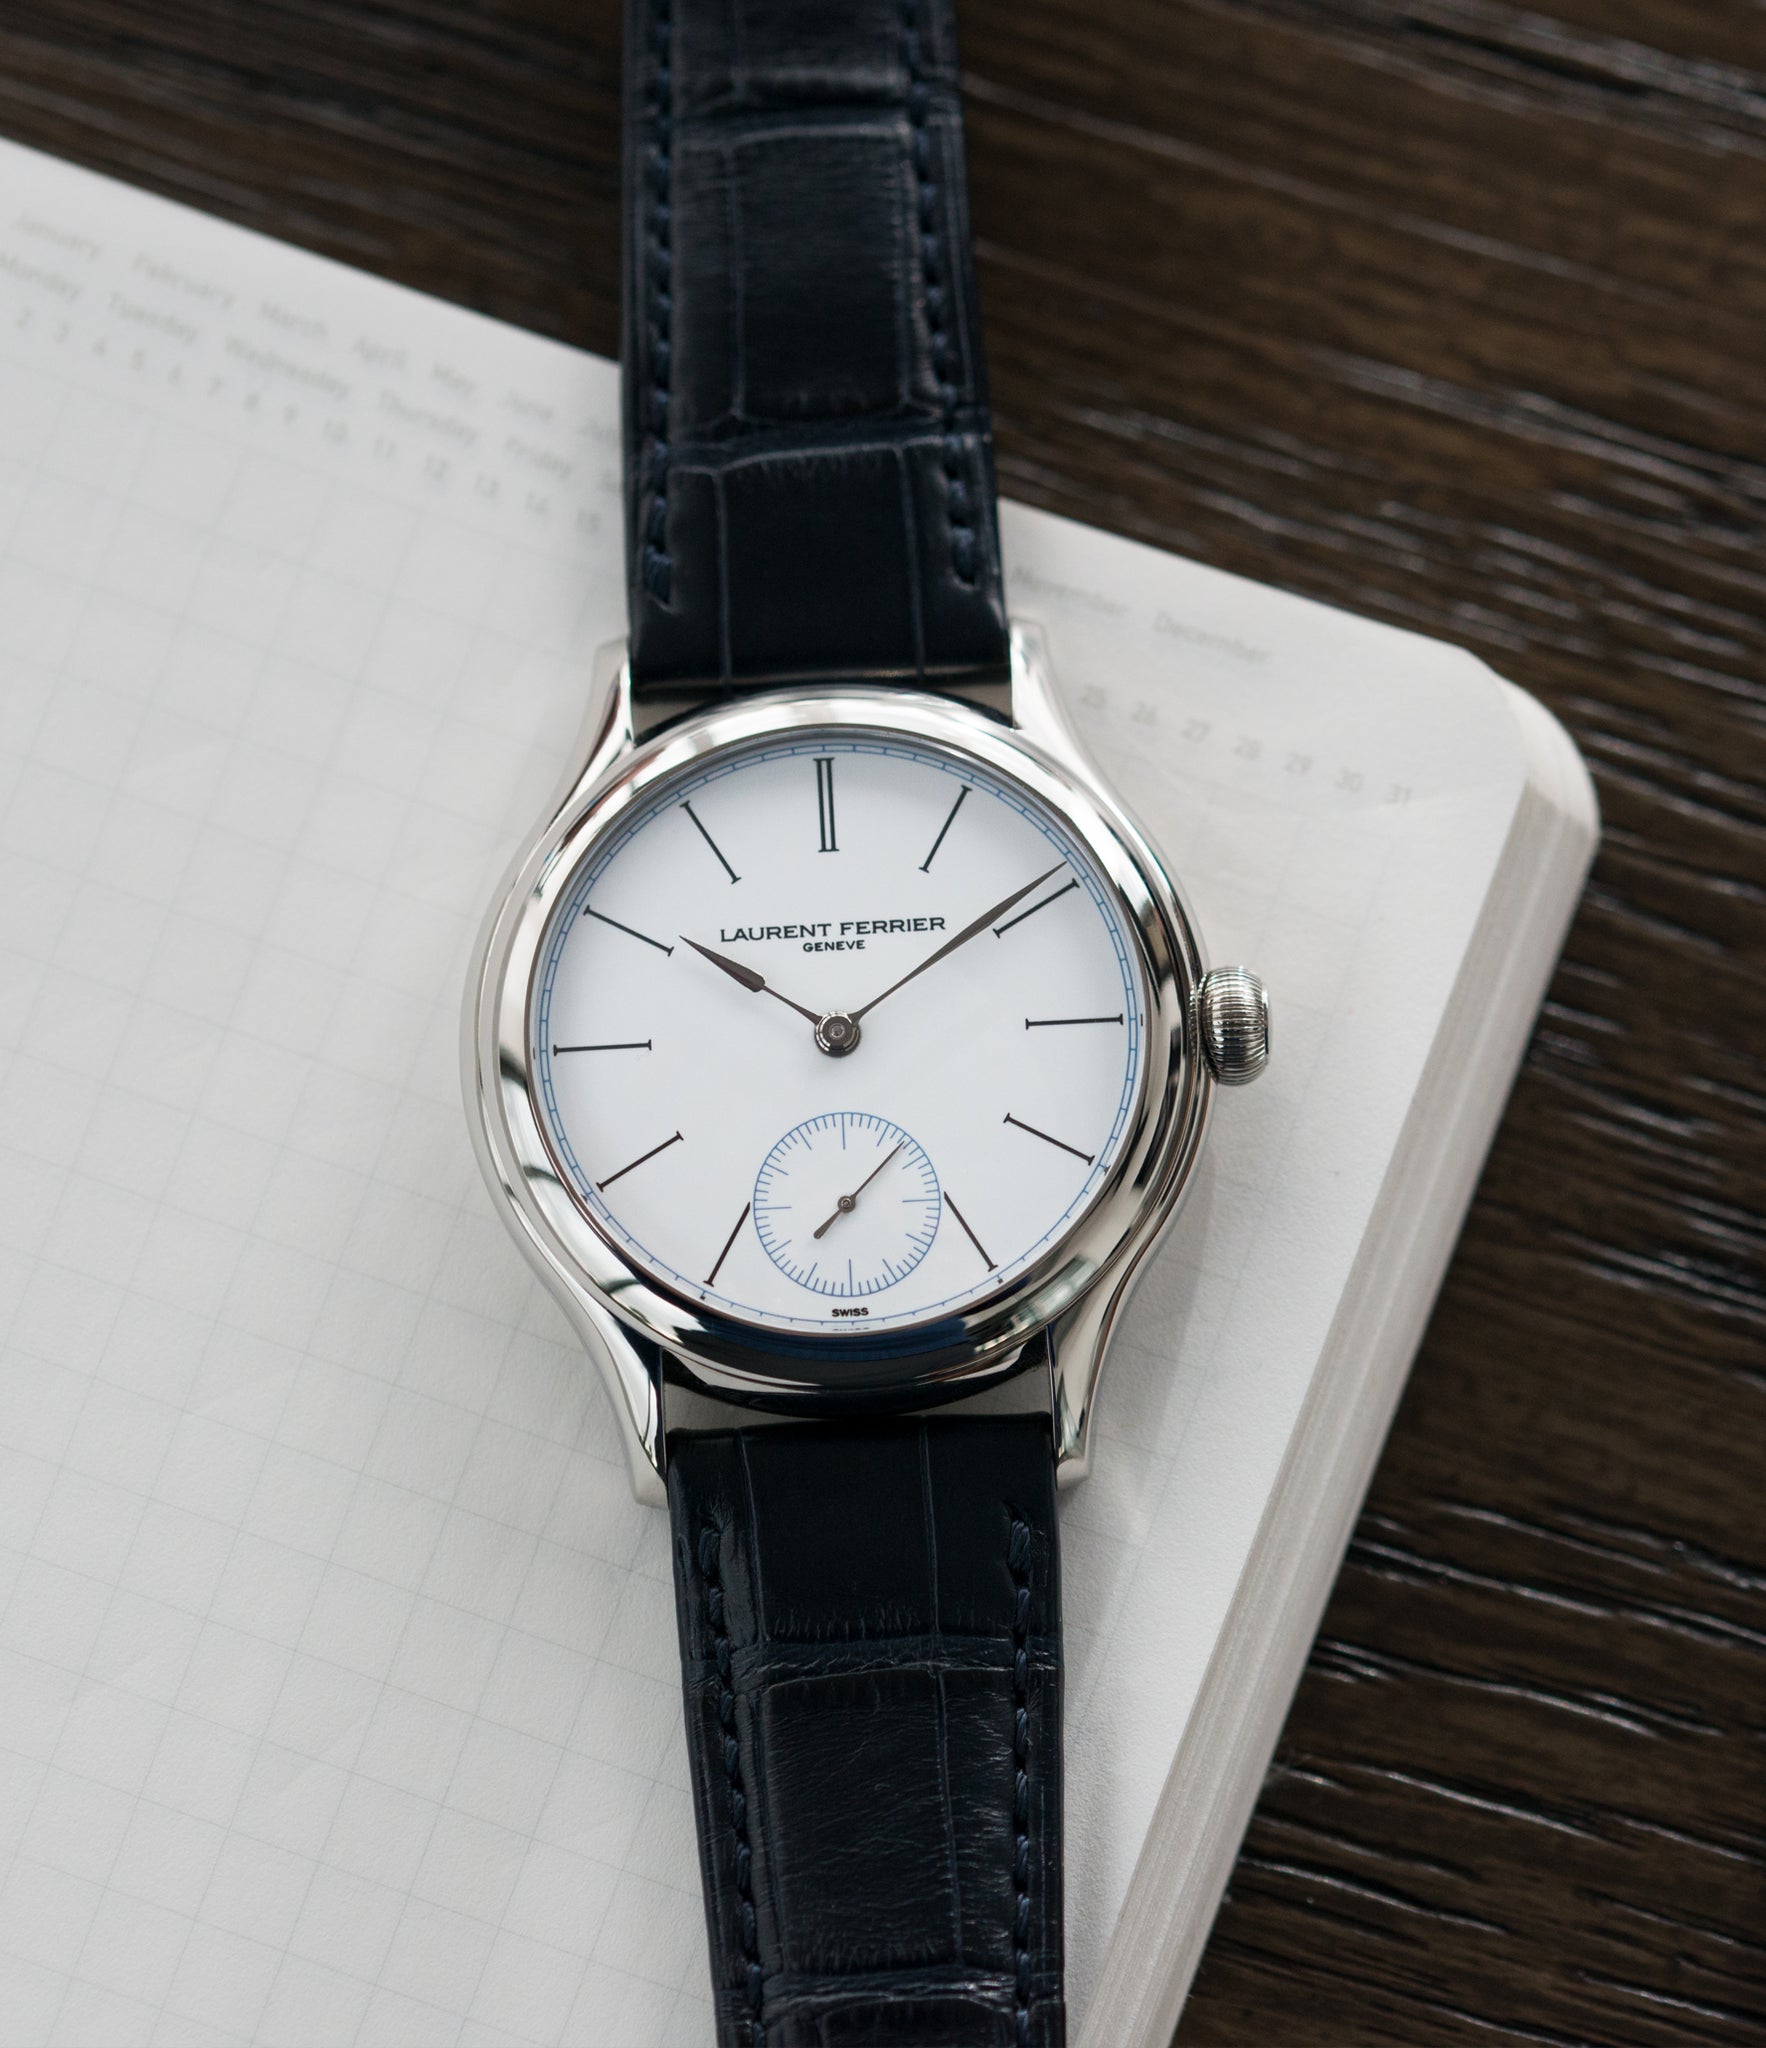 luxury rare dress watch Laurent Ferrier Galet Micro-Rotor FBN 230.02 Enamel dial steel watch for sale online at A Collected Man London UK approved seller of independent watchmaker Laurent Ferrier